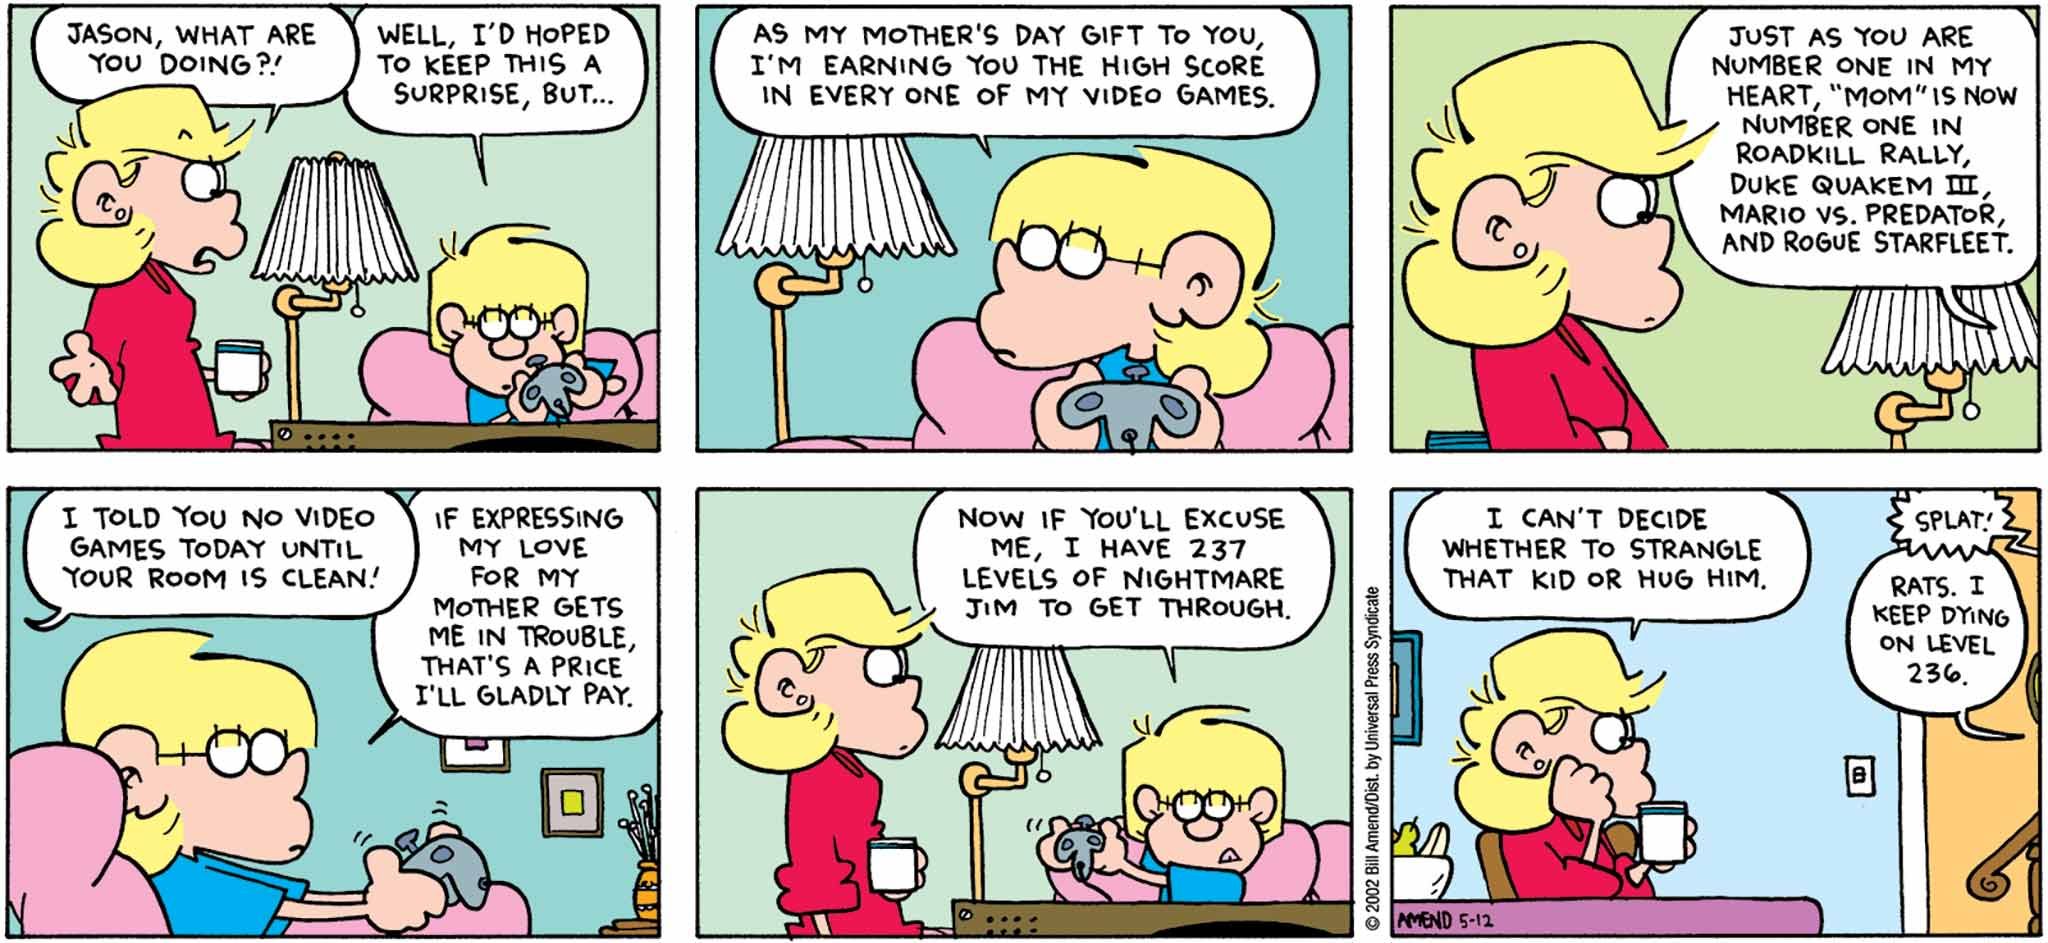 FoxTrot by Bill Amend - Mother's Day comic published May 12, 2002 - Andy: Jason, what are you doing?! Jason: Well, I'd hoped to keep this a surprise, but... as my Mother's Day gift to you, I'm earning you the high score in every one of my video games. Just as you are number one in my heart, "mom" is now number one in Roadkill Rally, Duke Quaken 3, Mario vs. Predator, and Rogue Starfleet. Andy: I told you no video games today until your room is clean! Jason: If expressing my love for my mother gets me in trouble, that's a price I'll gladly pay. Now if you'll excuse me, I have 237 levels of Nightmare Jim to get through. Andy: I can't decide whether to strangle that kid or hug him. Jason: Rats. I keep dying at 236.